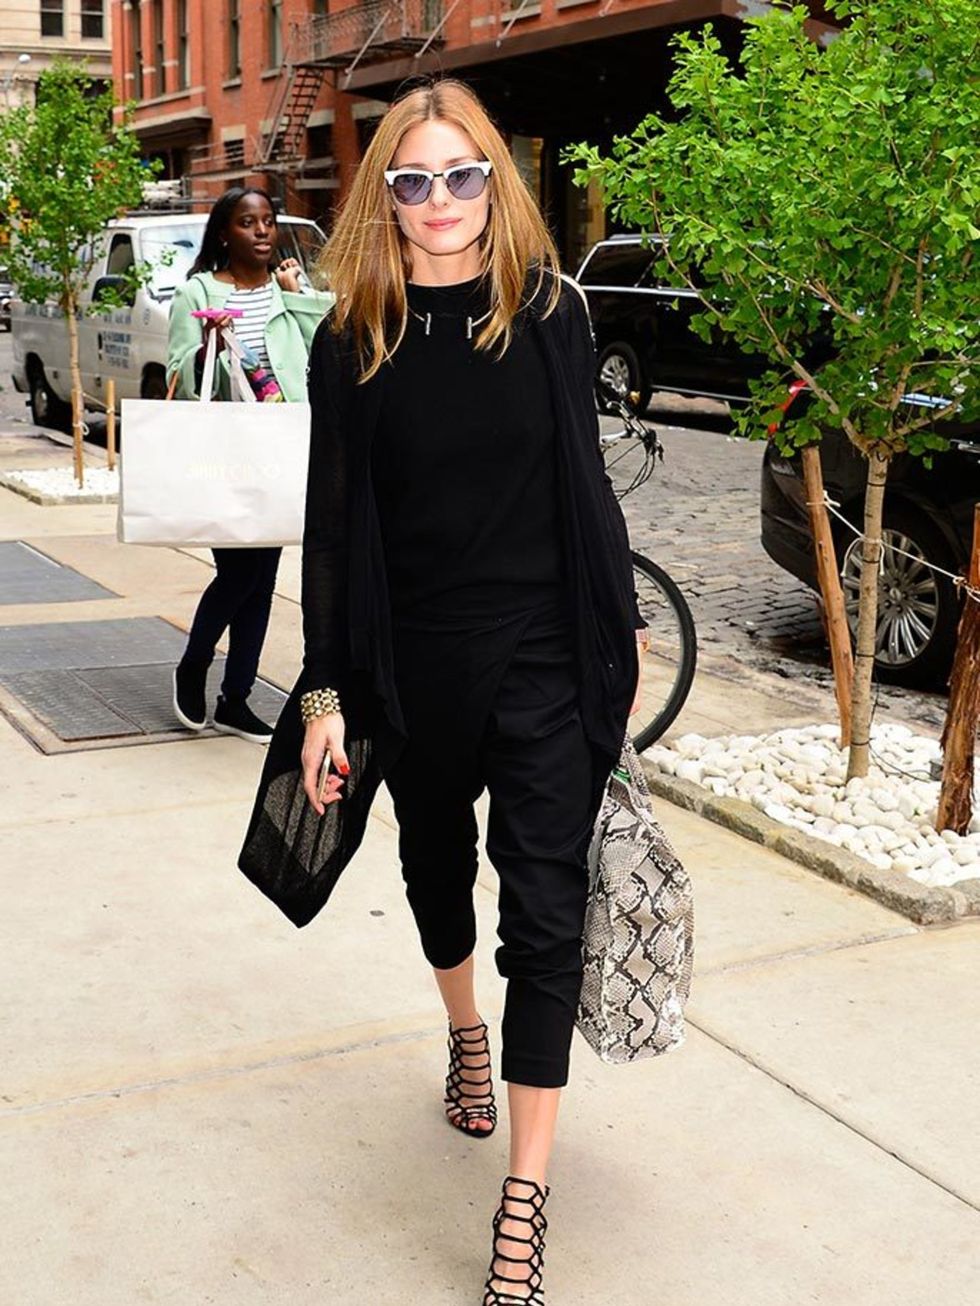 Olivia Palermo Wore All Black in the Chicest Way